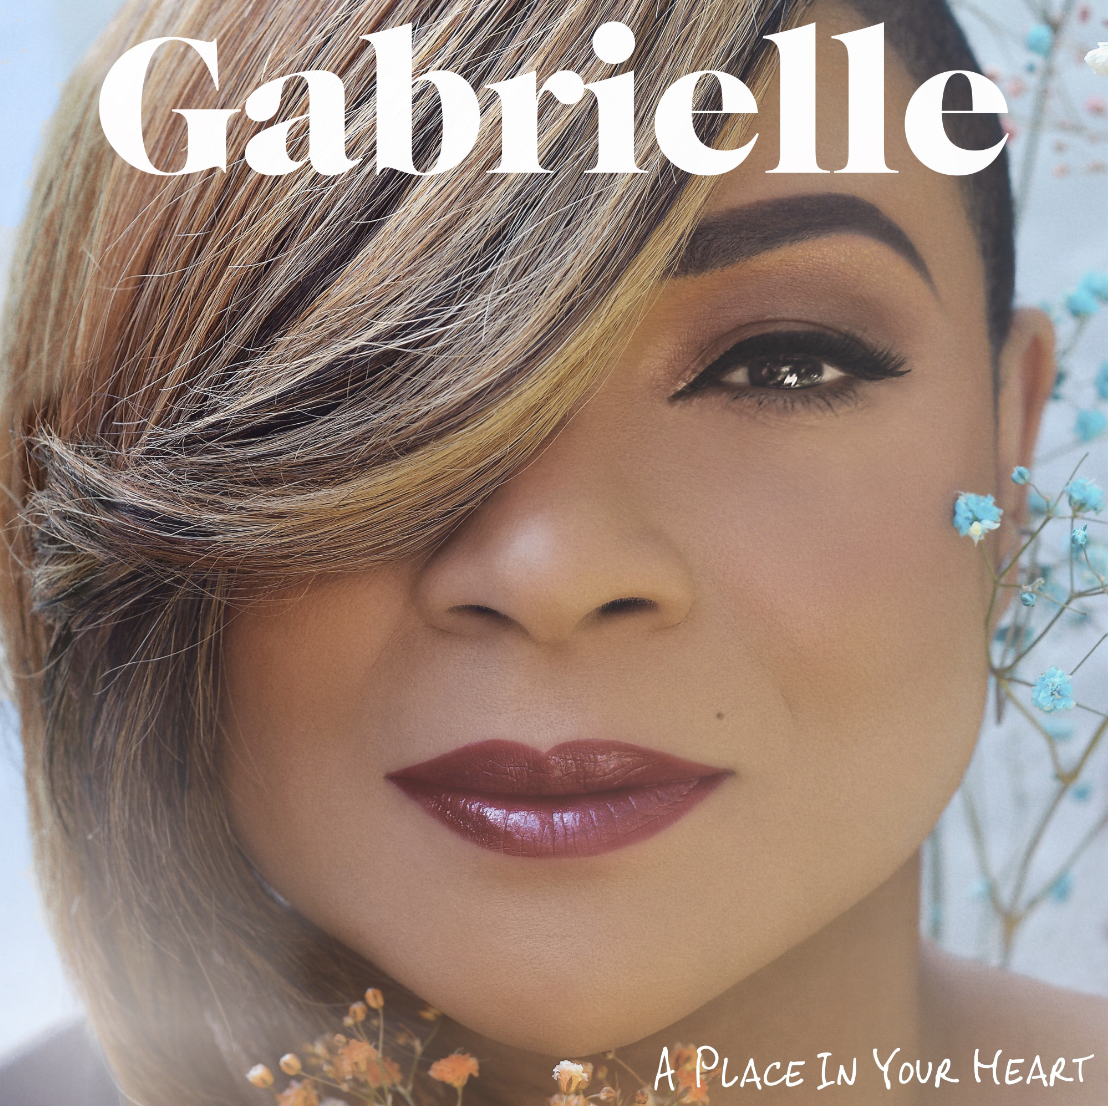 Gabrielle - A Place In Your Heart